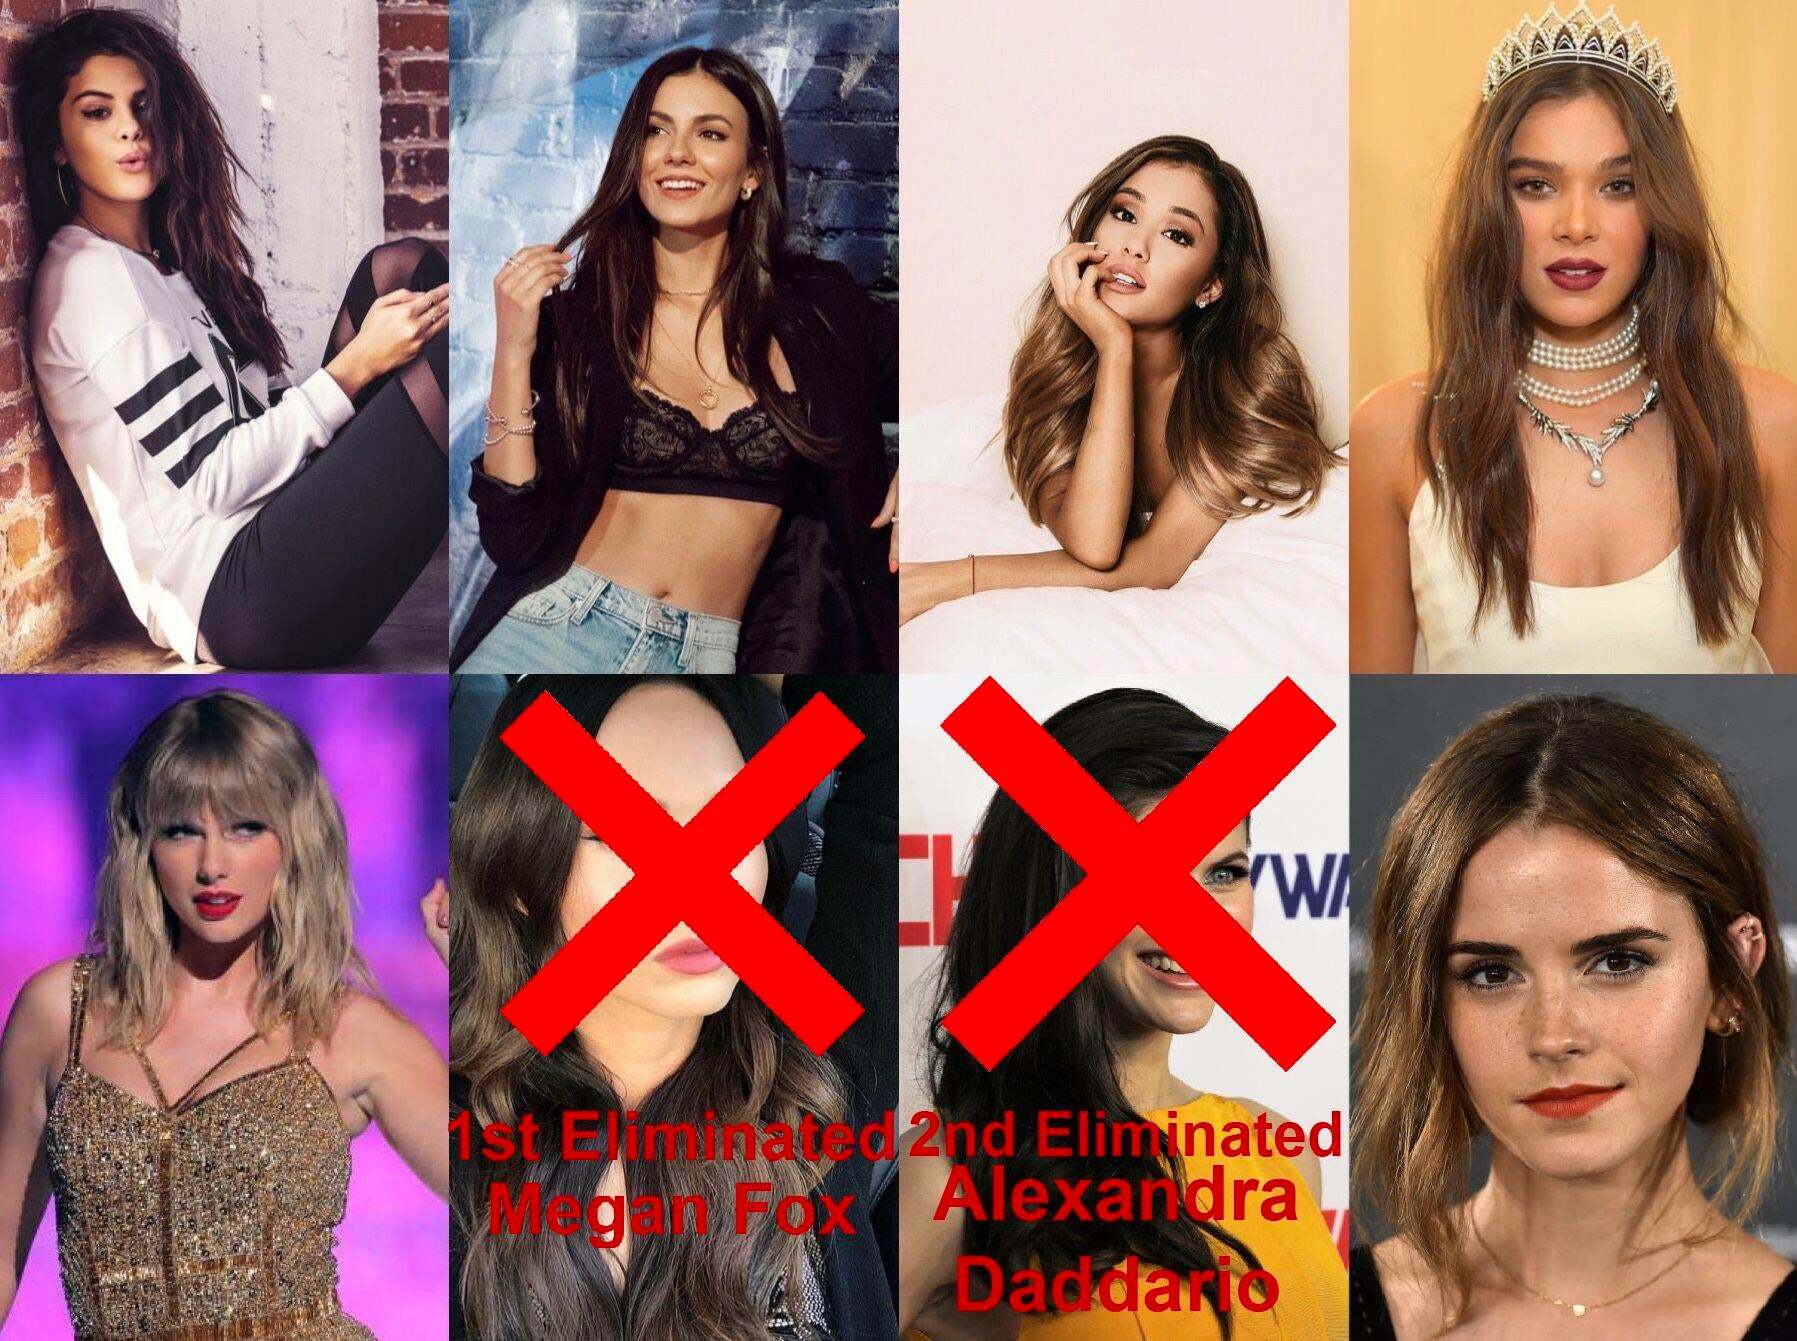 Tightest Pussy Tournament 3. Choose the next girl to be eliminated. Poll in comments. Selena Gomez, Victoria Justice, Ariana Grande, Hailee Steinfeld, Taylor Swift, Emma Watson